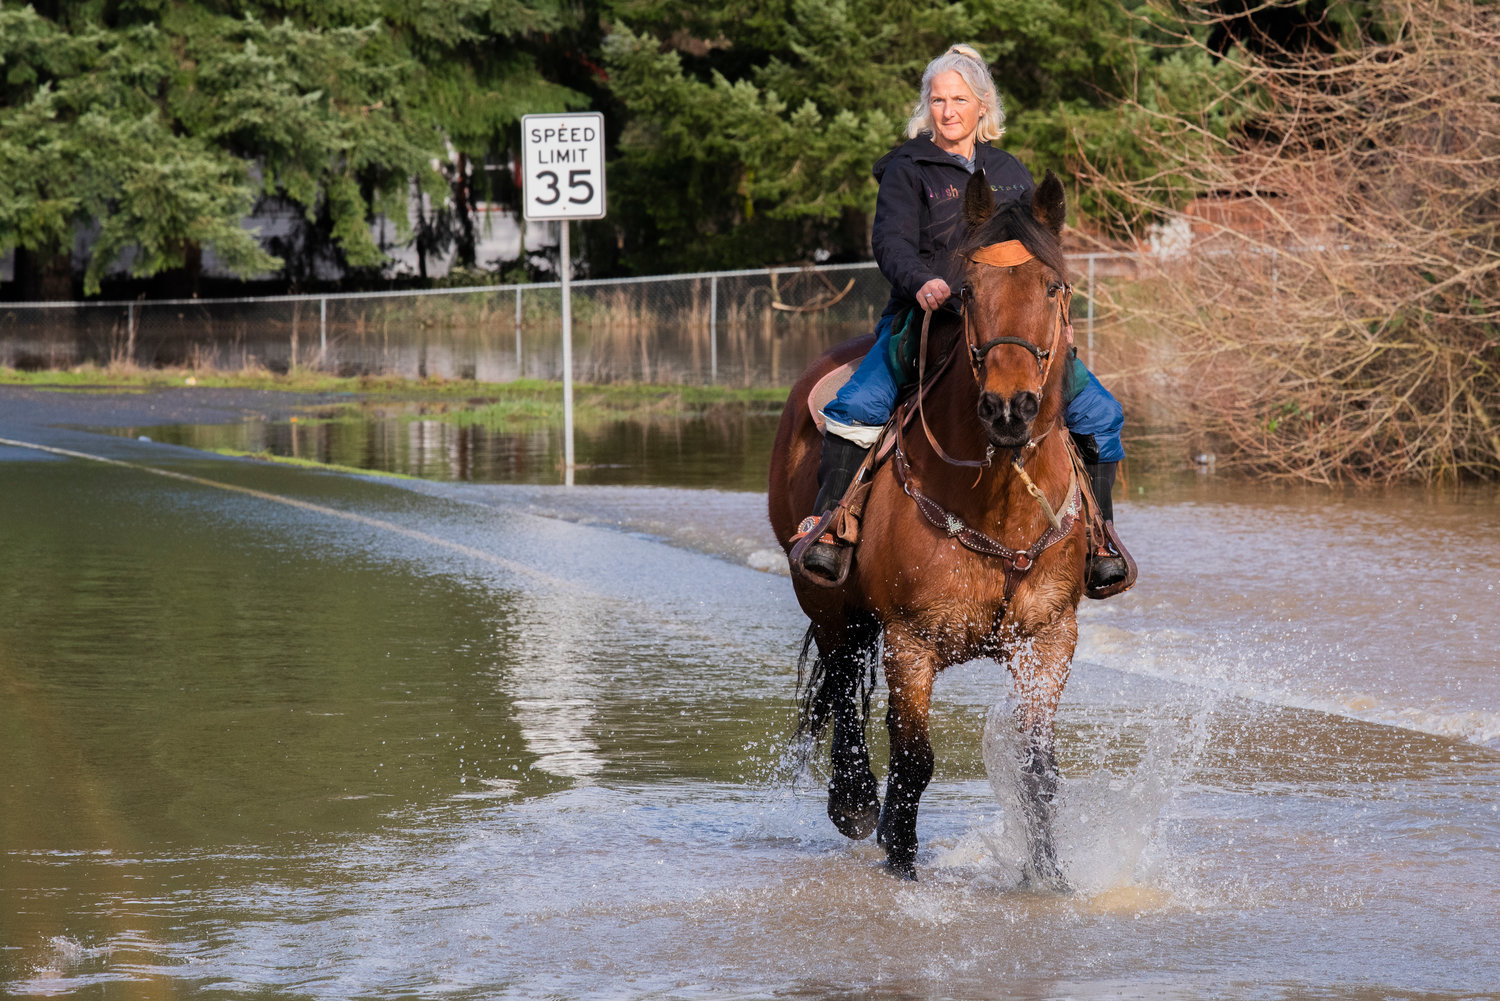 Tricia Ingram rides her horse, Valeria, through flood waters near Moon Road and U.S. Highway 12 in Rochester on Saturday.